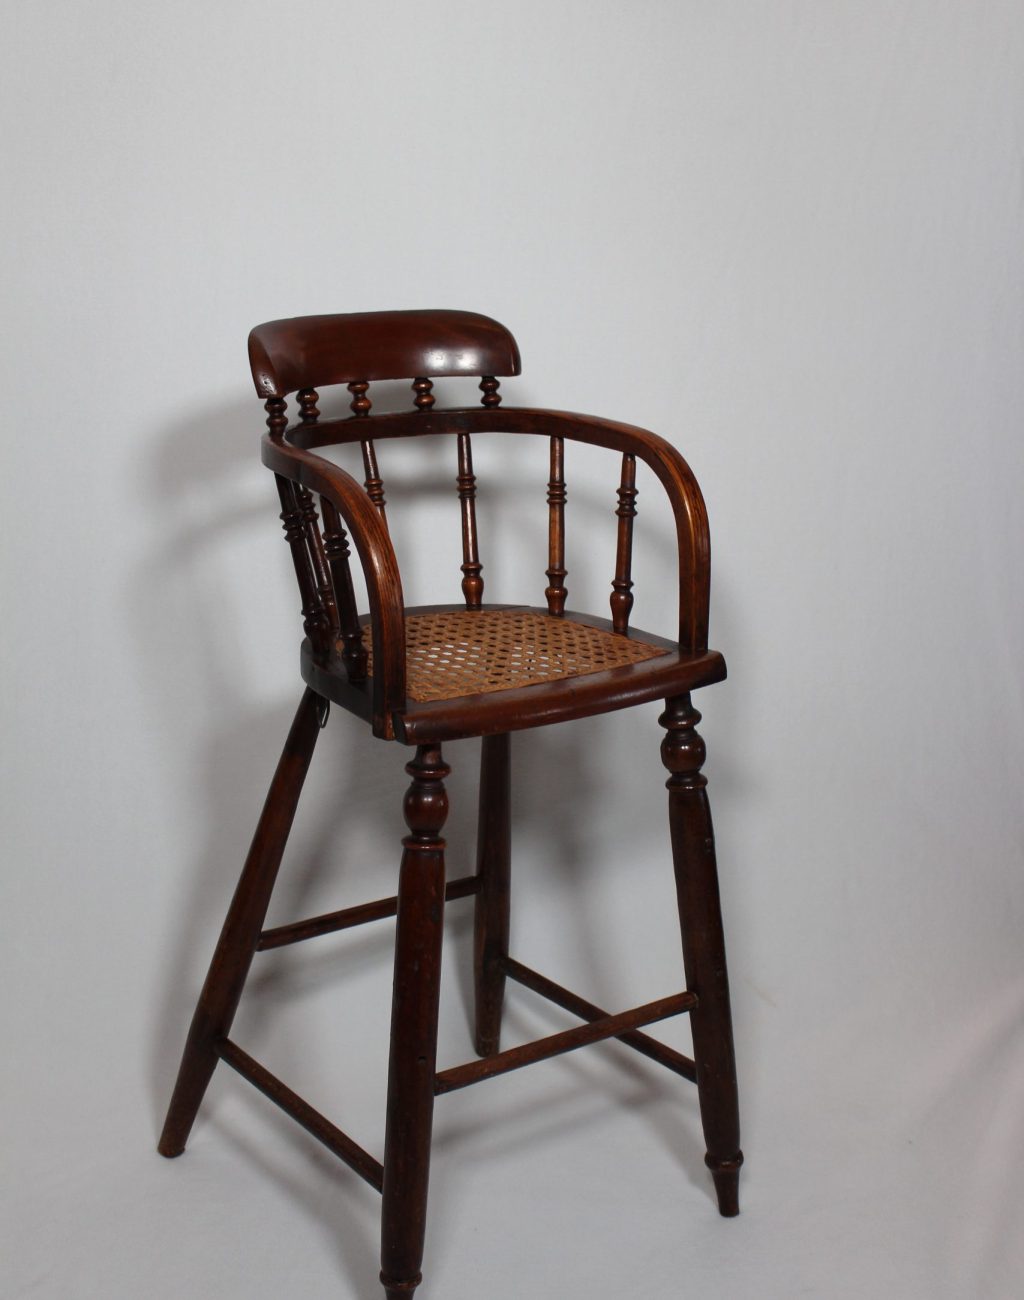 A wooden chair with a wicker seat.